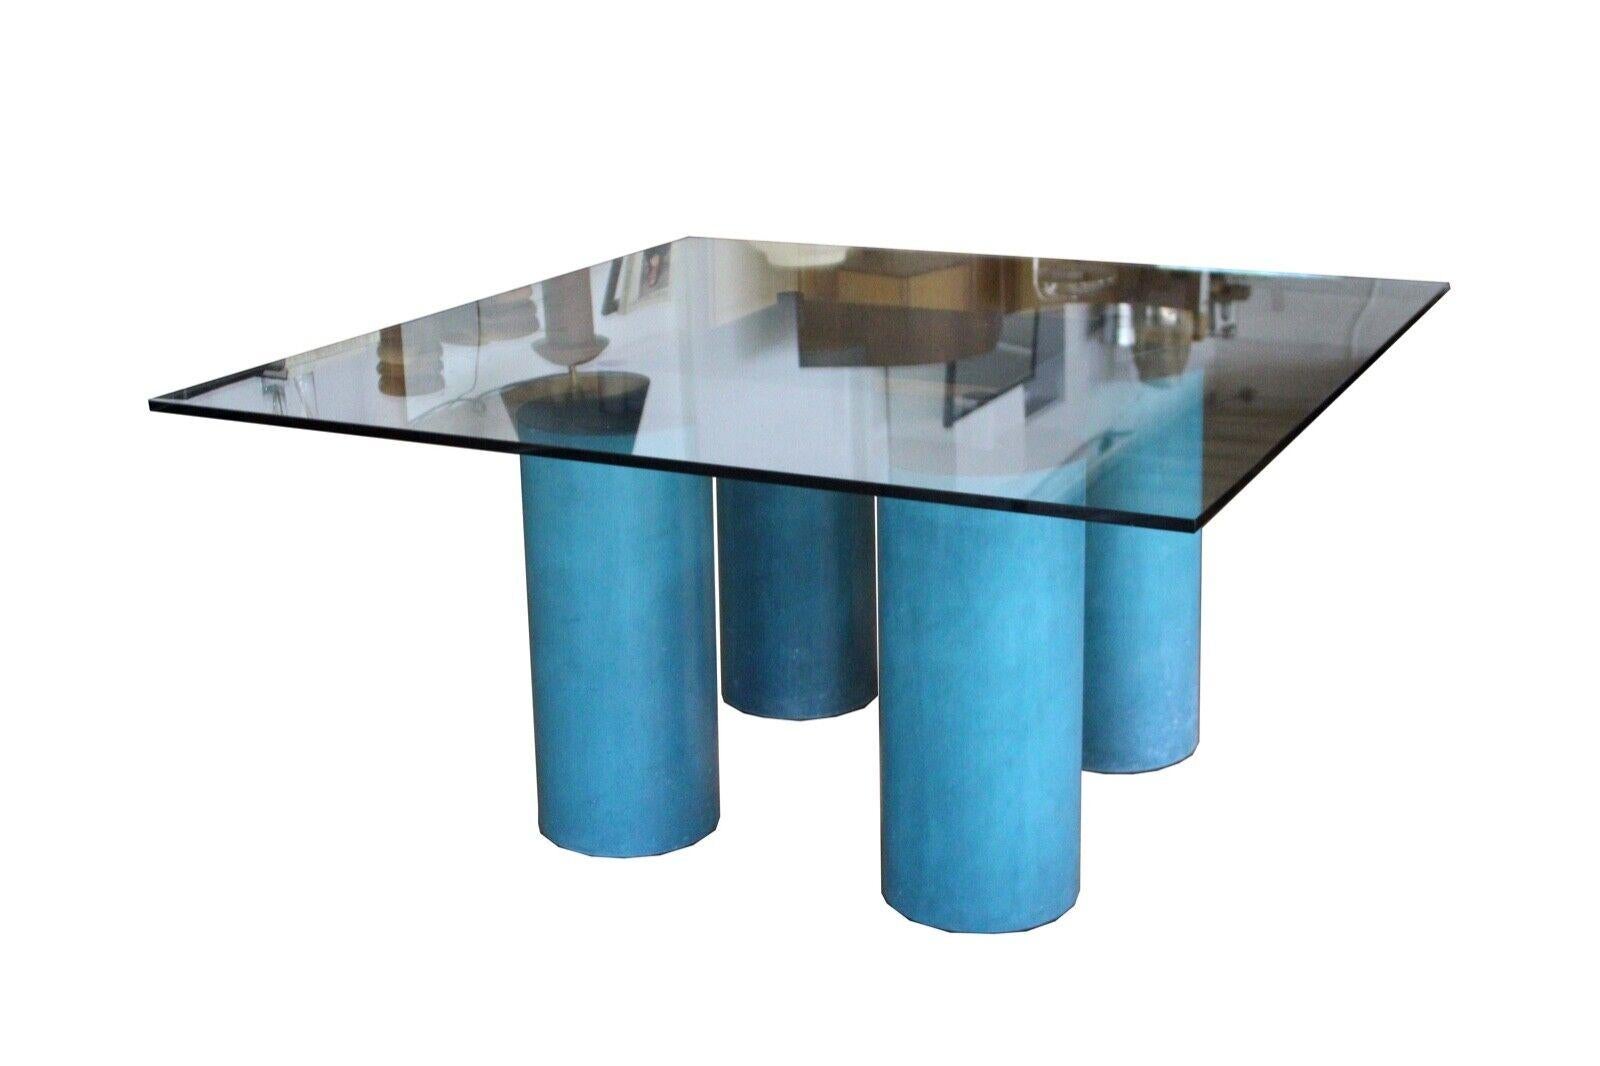 Le Shoppe Too presents this magnificent Post Modern designed table or desk by Leila and Massimo Vignelli. 4 turquise painted metal columns support the gloating glass top. In great condition. Dimensions: 57